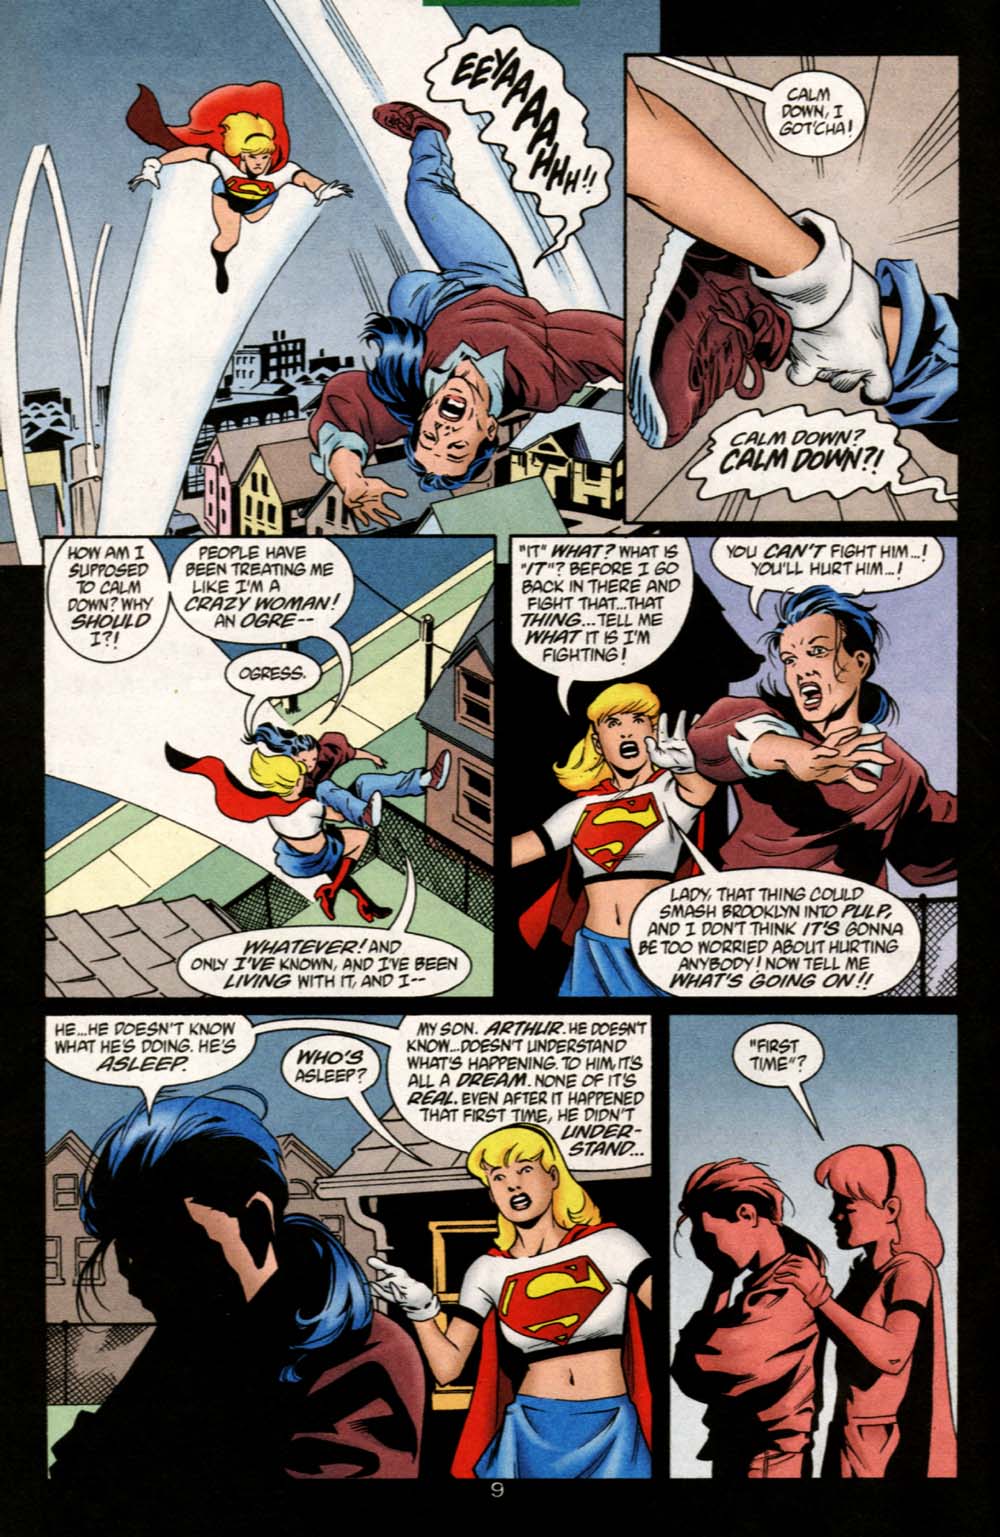 Supergirl (1996) 54 Page 9